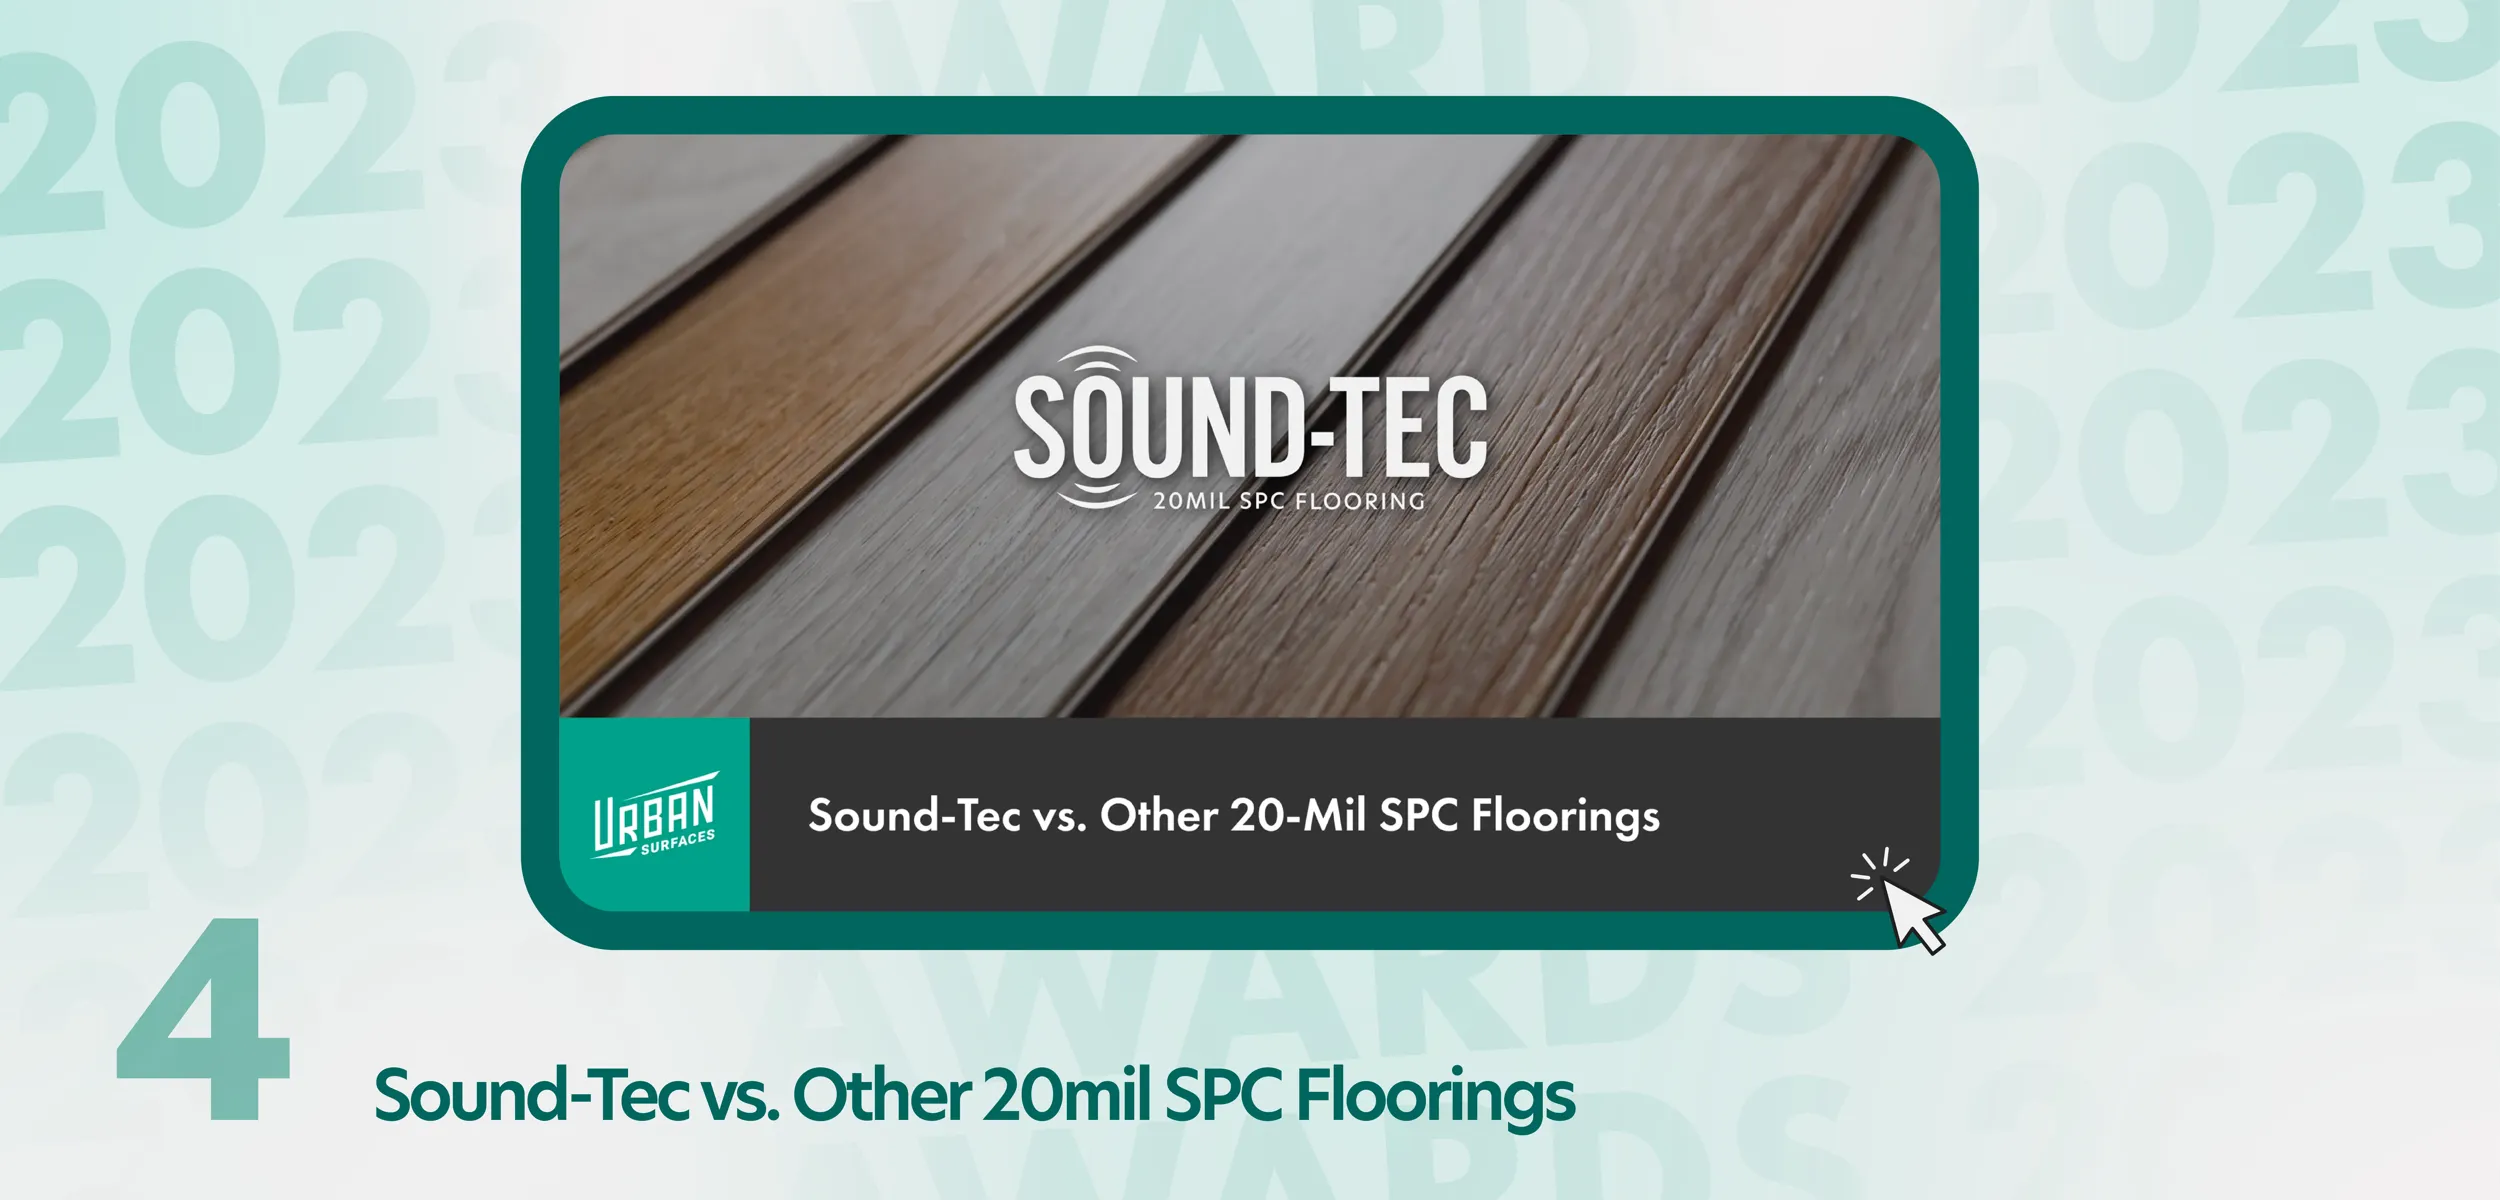 Several pieces of Sound-Tec Floating Floor planks laid on top of each others. Title: Sound-Tec vs. Other 20-Mil SPC Floorings.